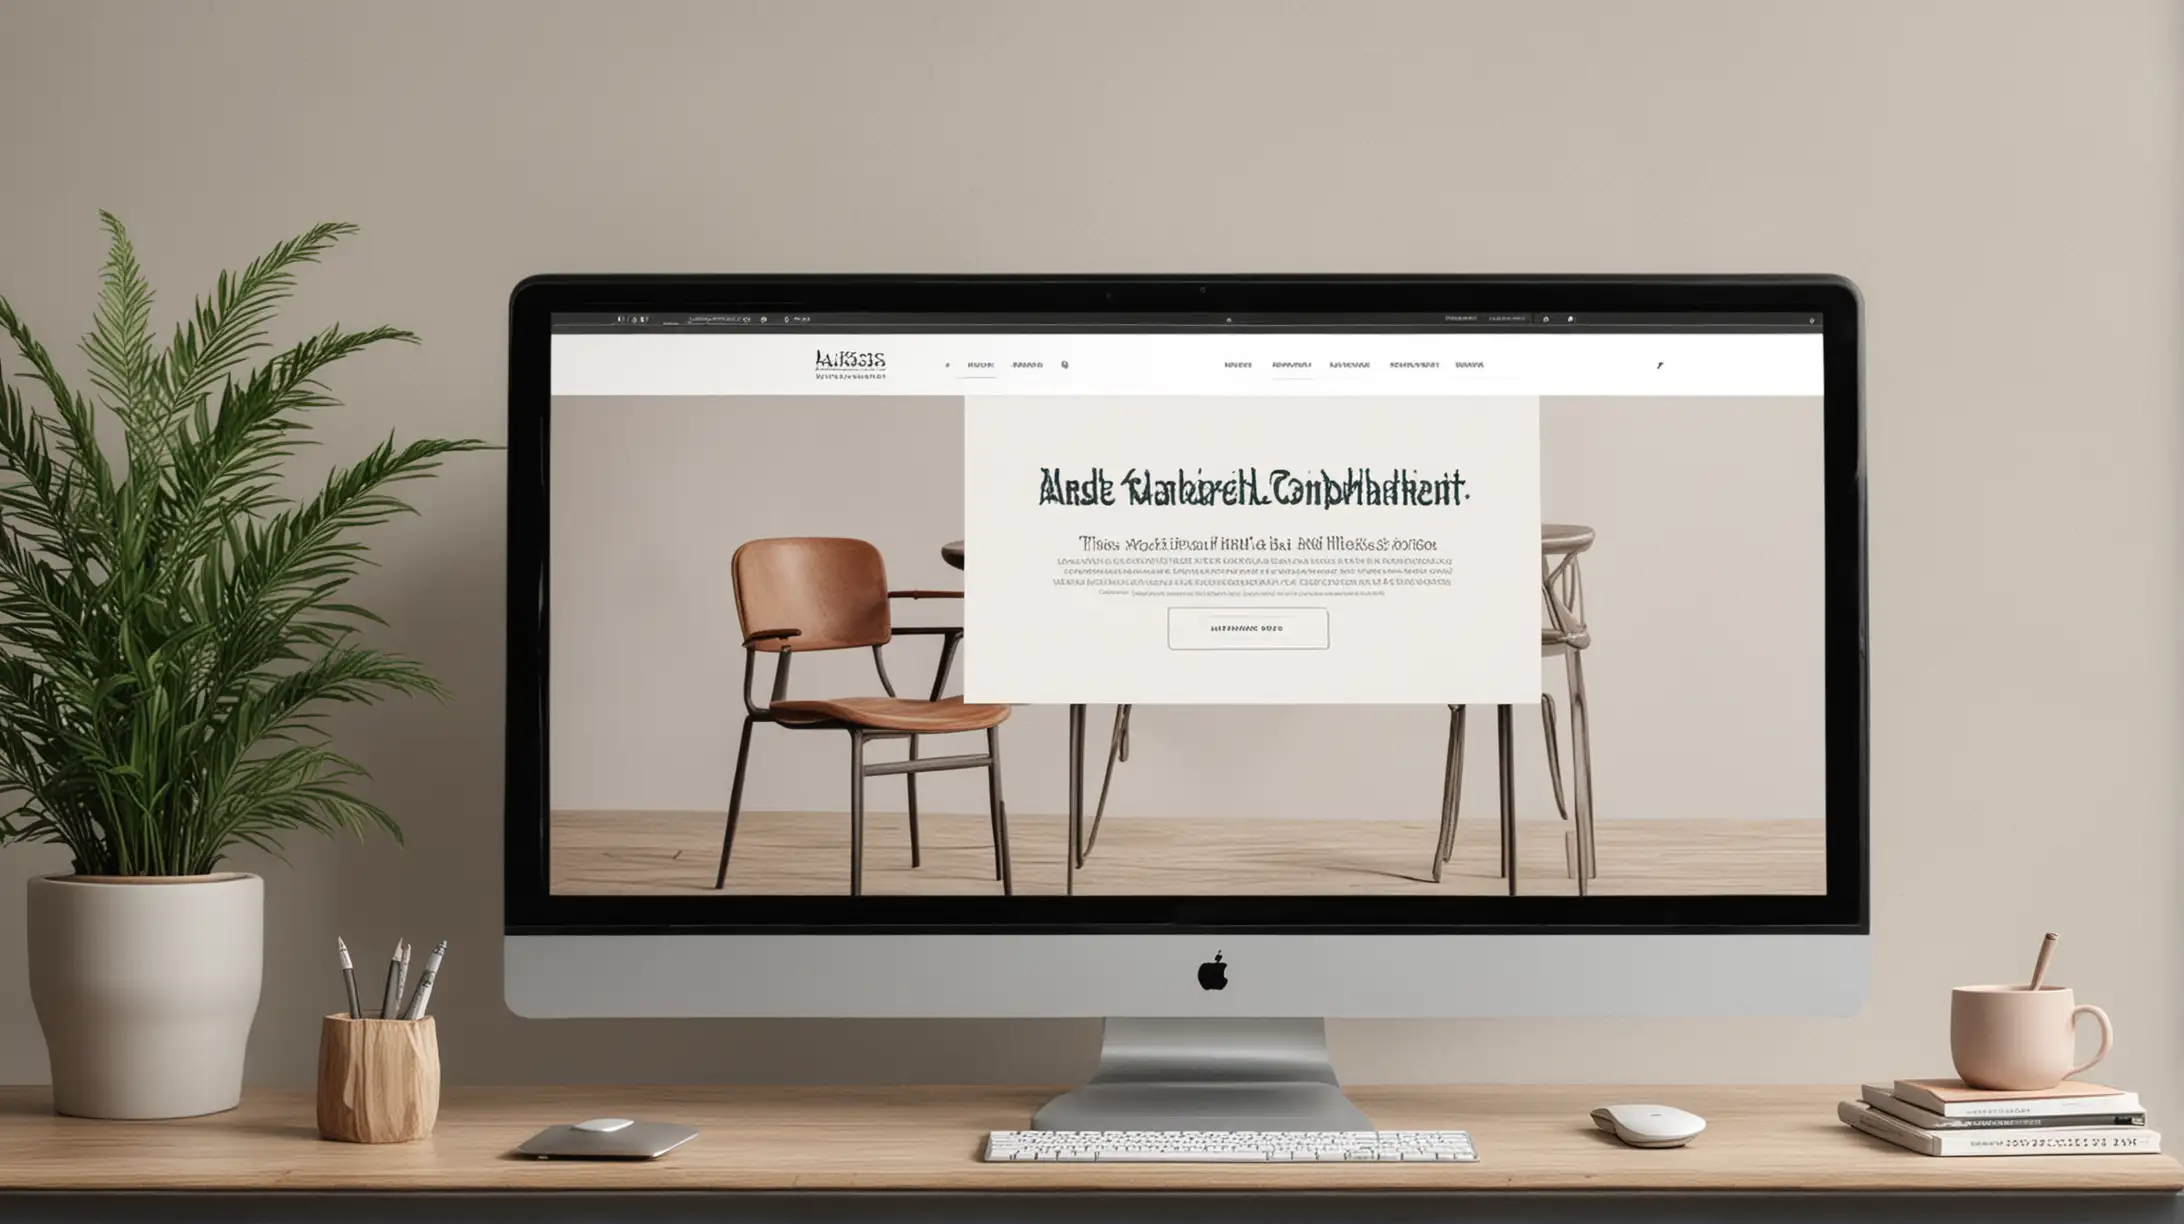 Accessible Website Design Visual Representation without Text